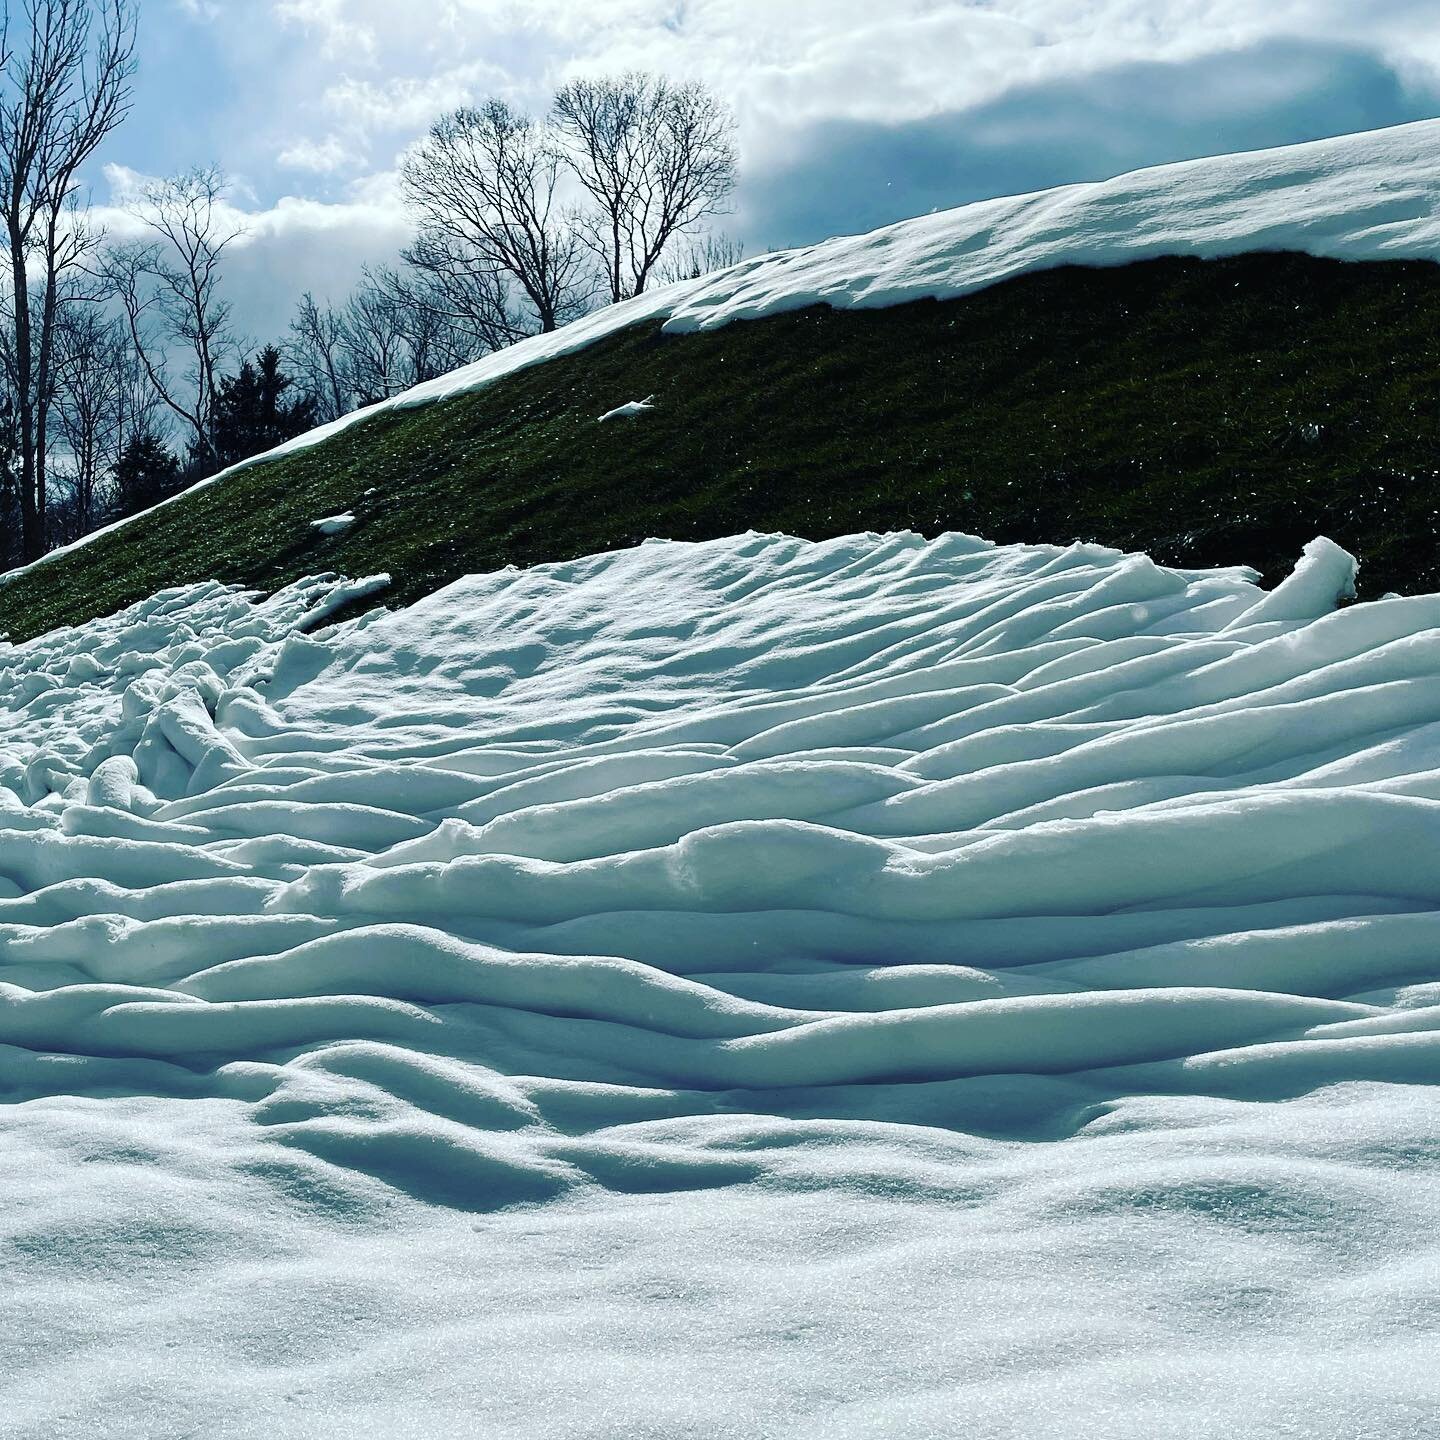 Folds of snow. Nothing to do with wood, but too cool to not share.